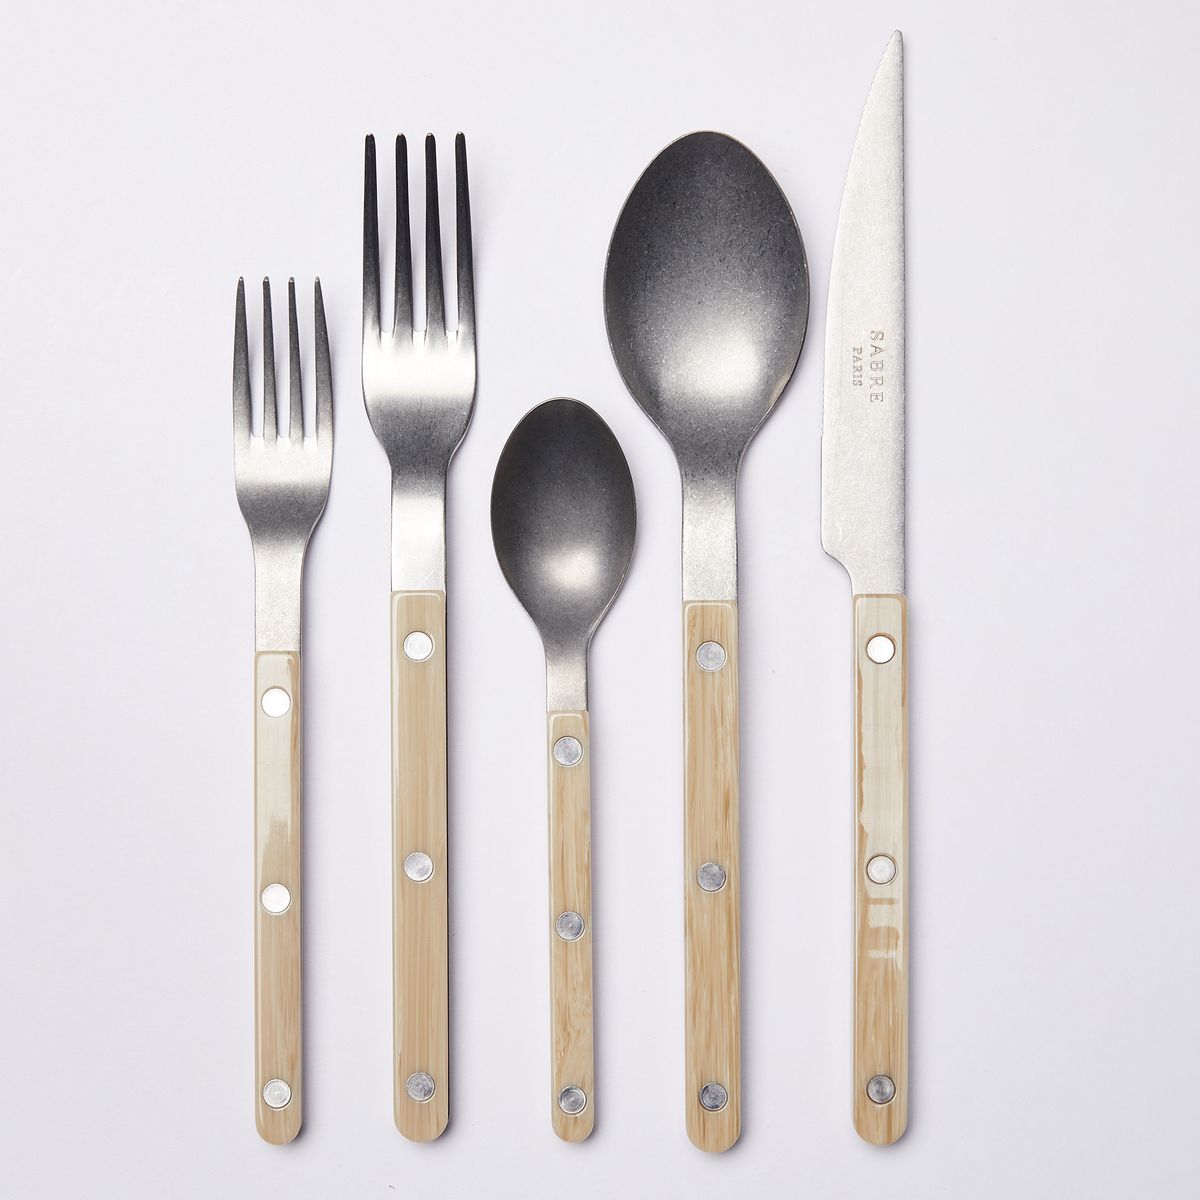 5 piece stylish flatware with matte acrylic handles in light warm tan. In order of salad fork, dinner fork, small spoon, soup spoon, and knife.